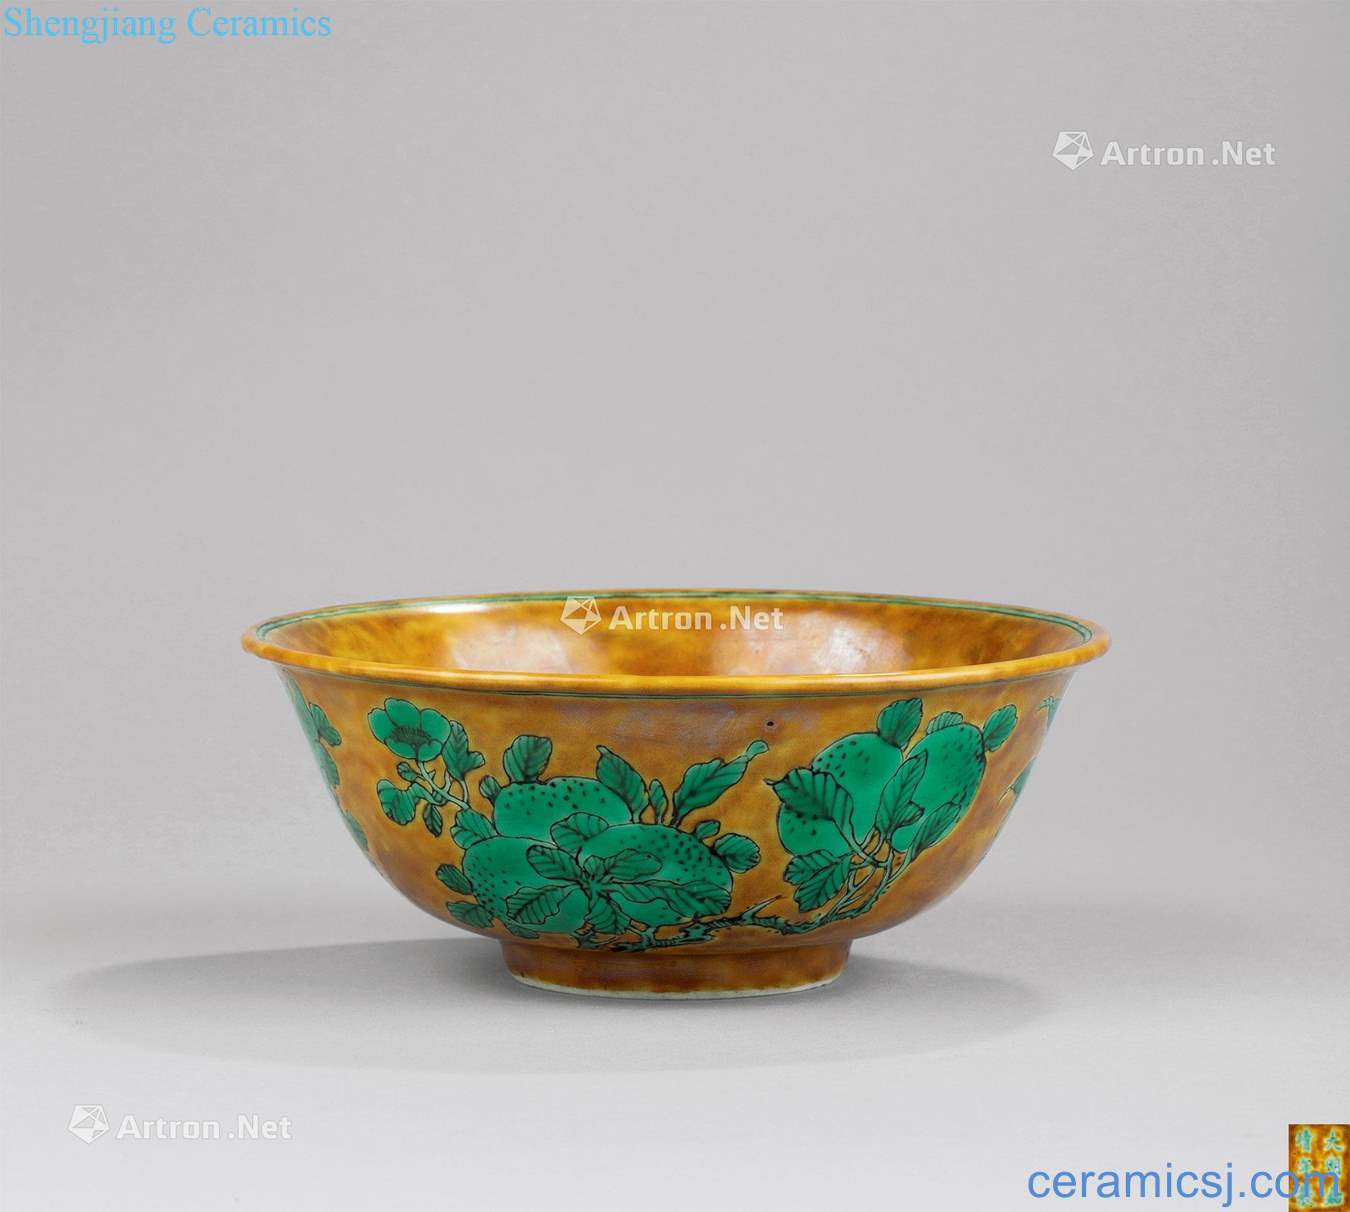 In the Ming dynasty (1368-1644) yellow glaze green color live green-splashed bowls